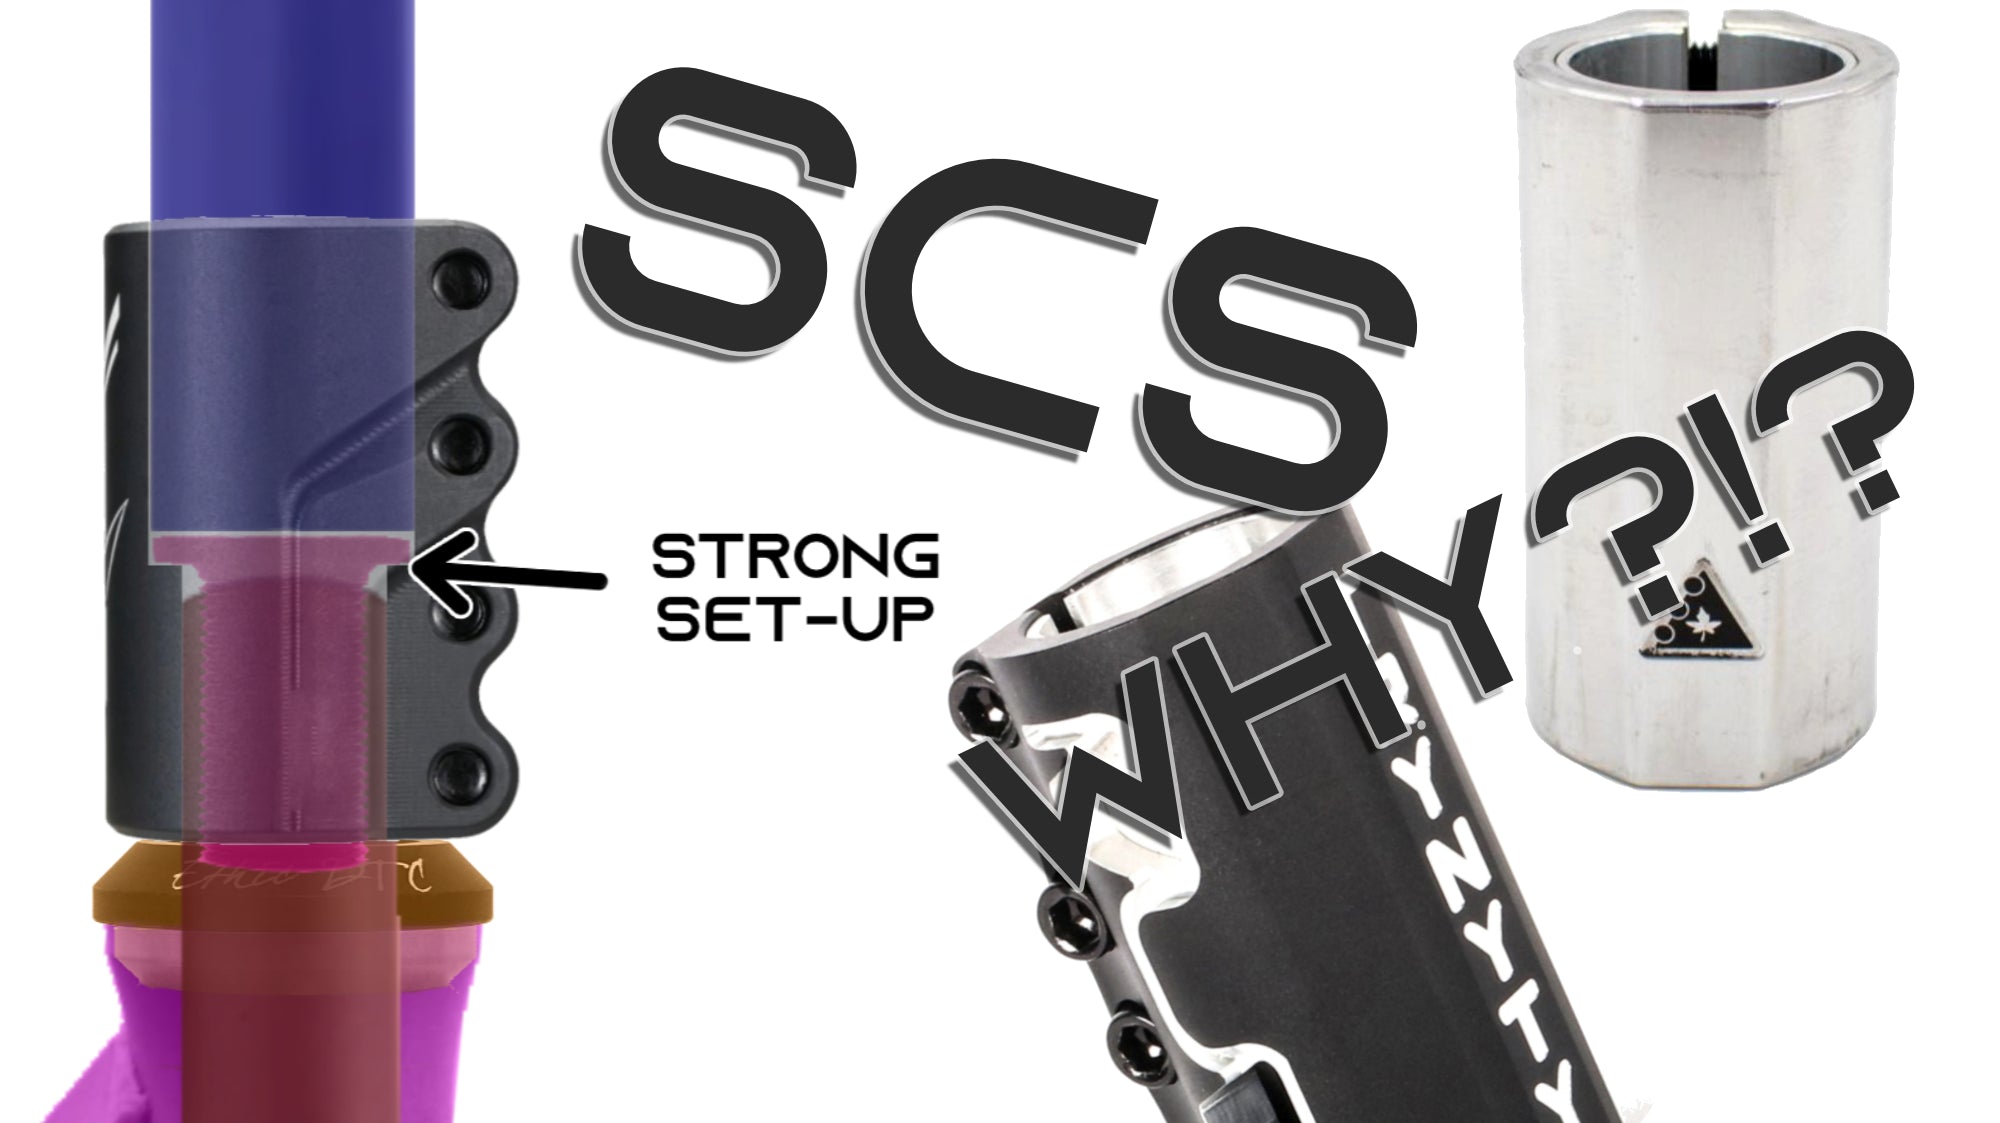 How To Use An SCS Clamp